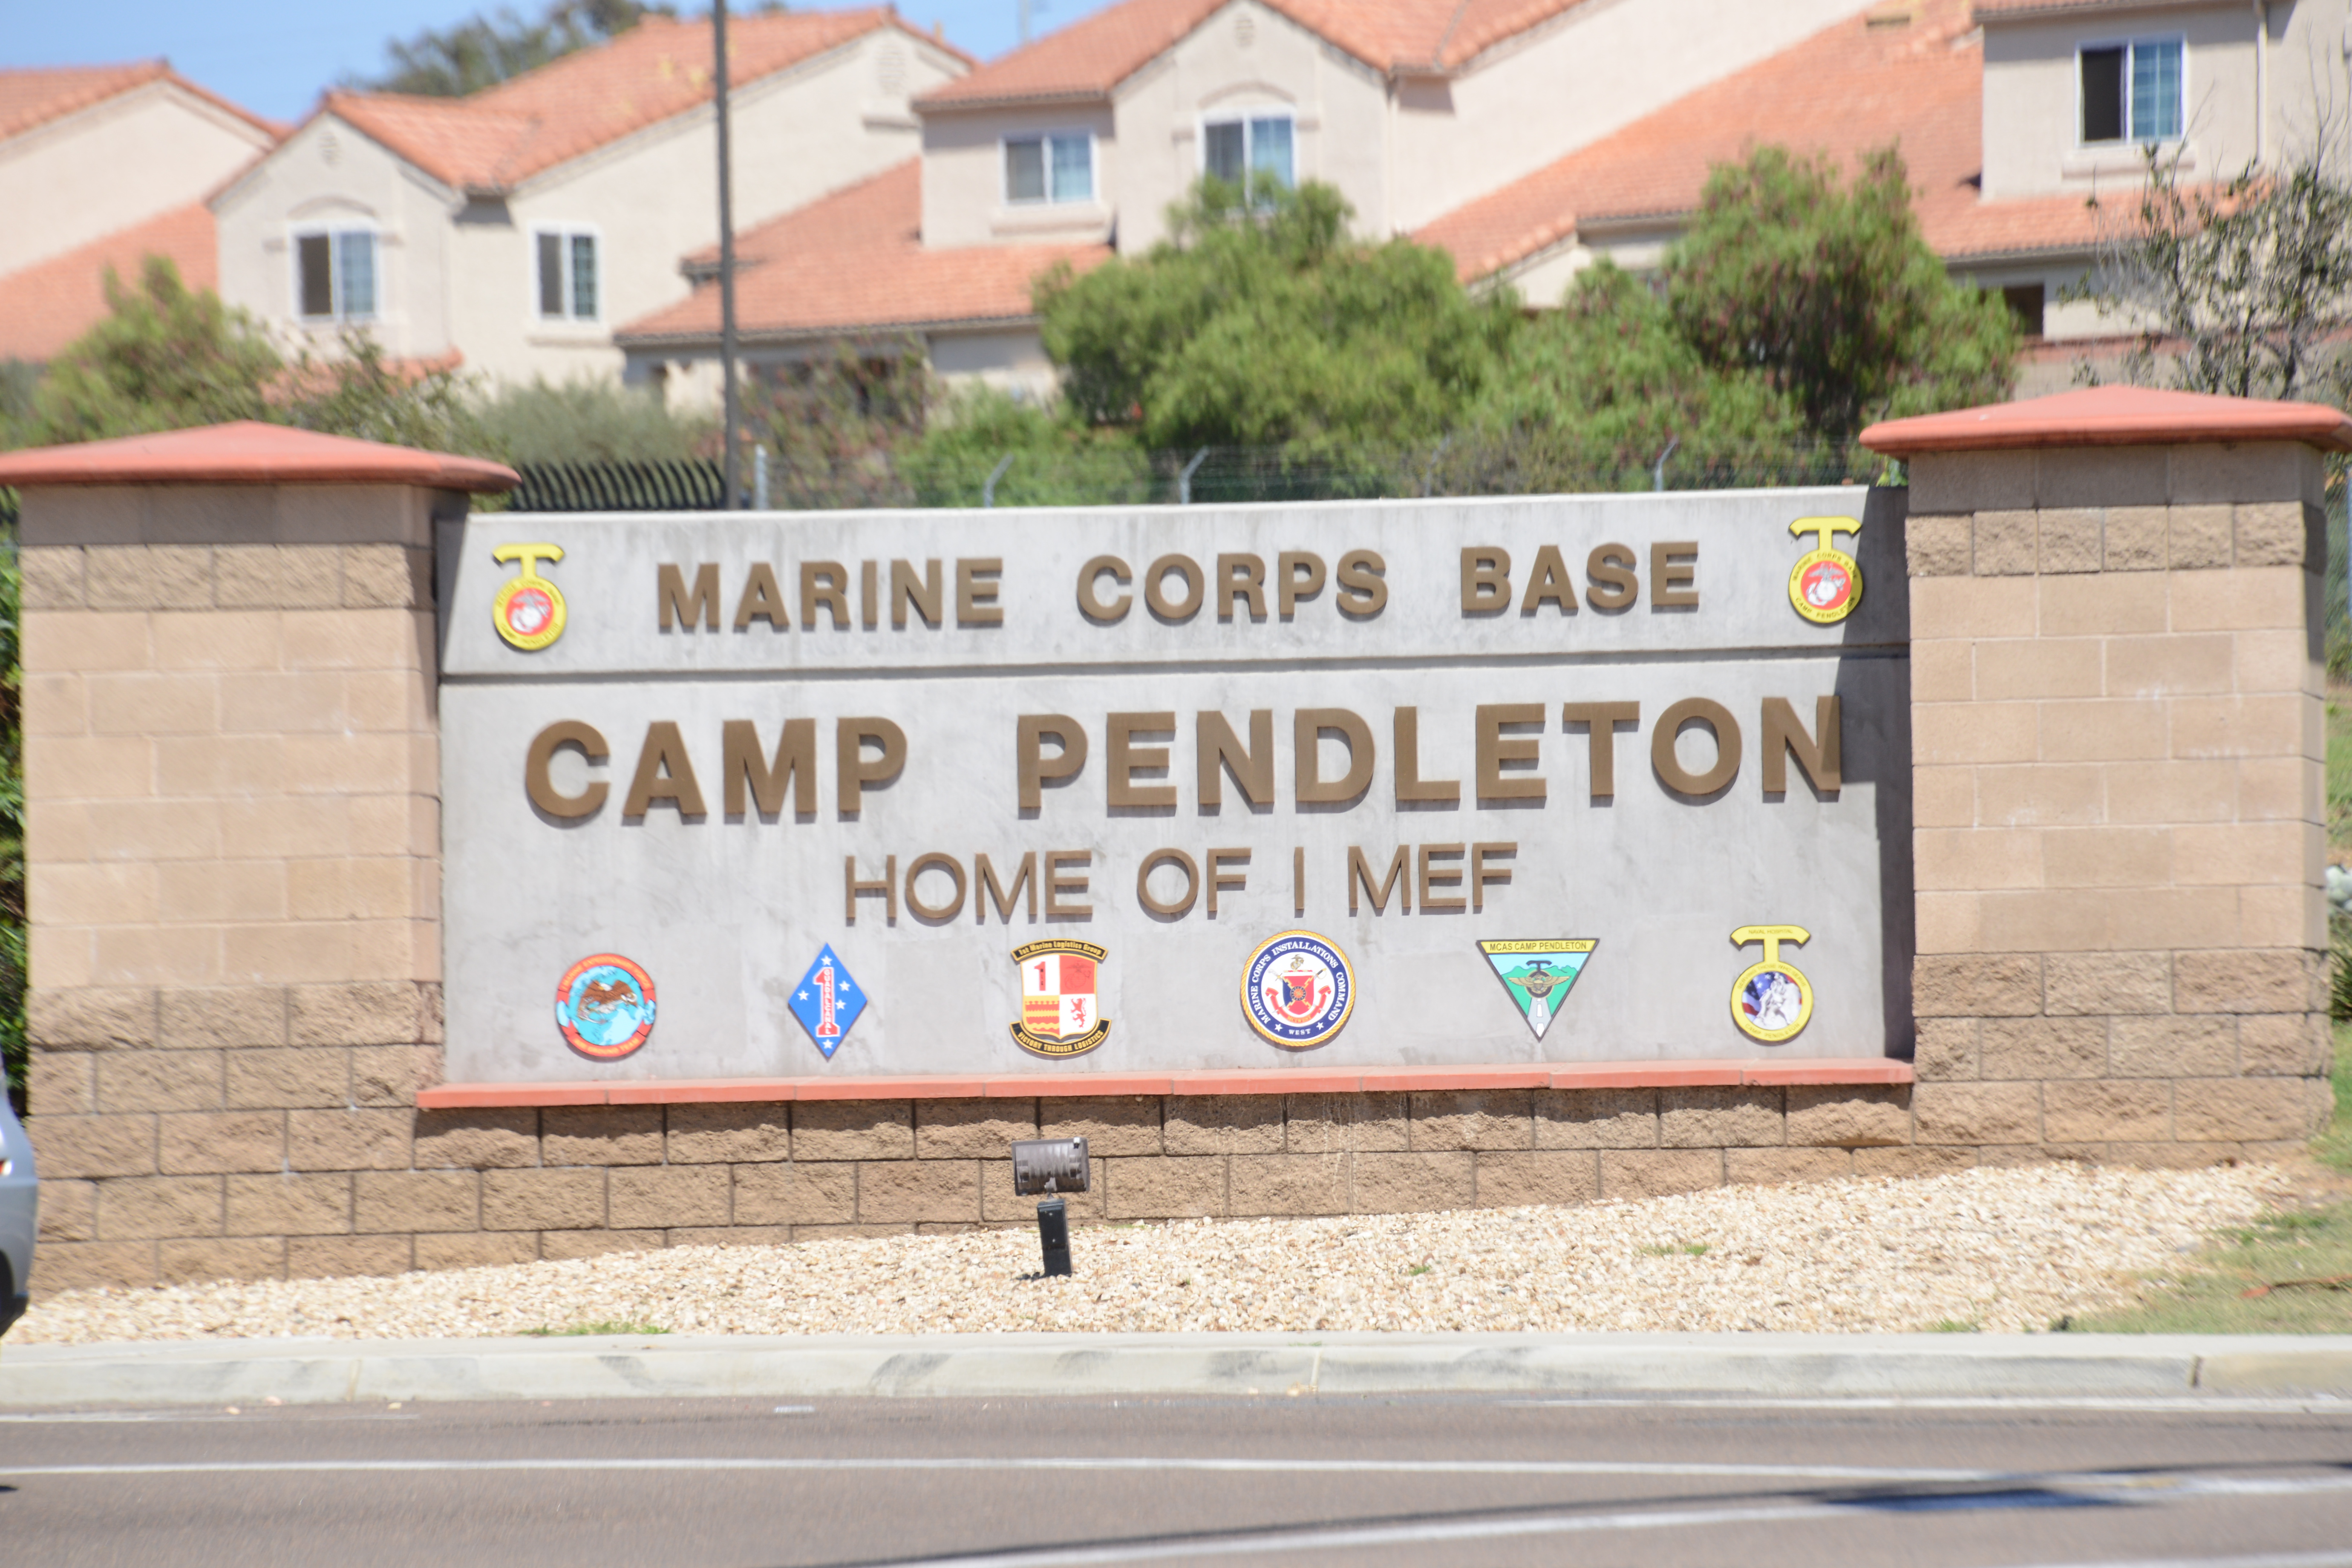 United Association Veterans In Piping Welding Class 36 at Camp Pendleton